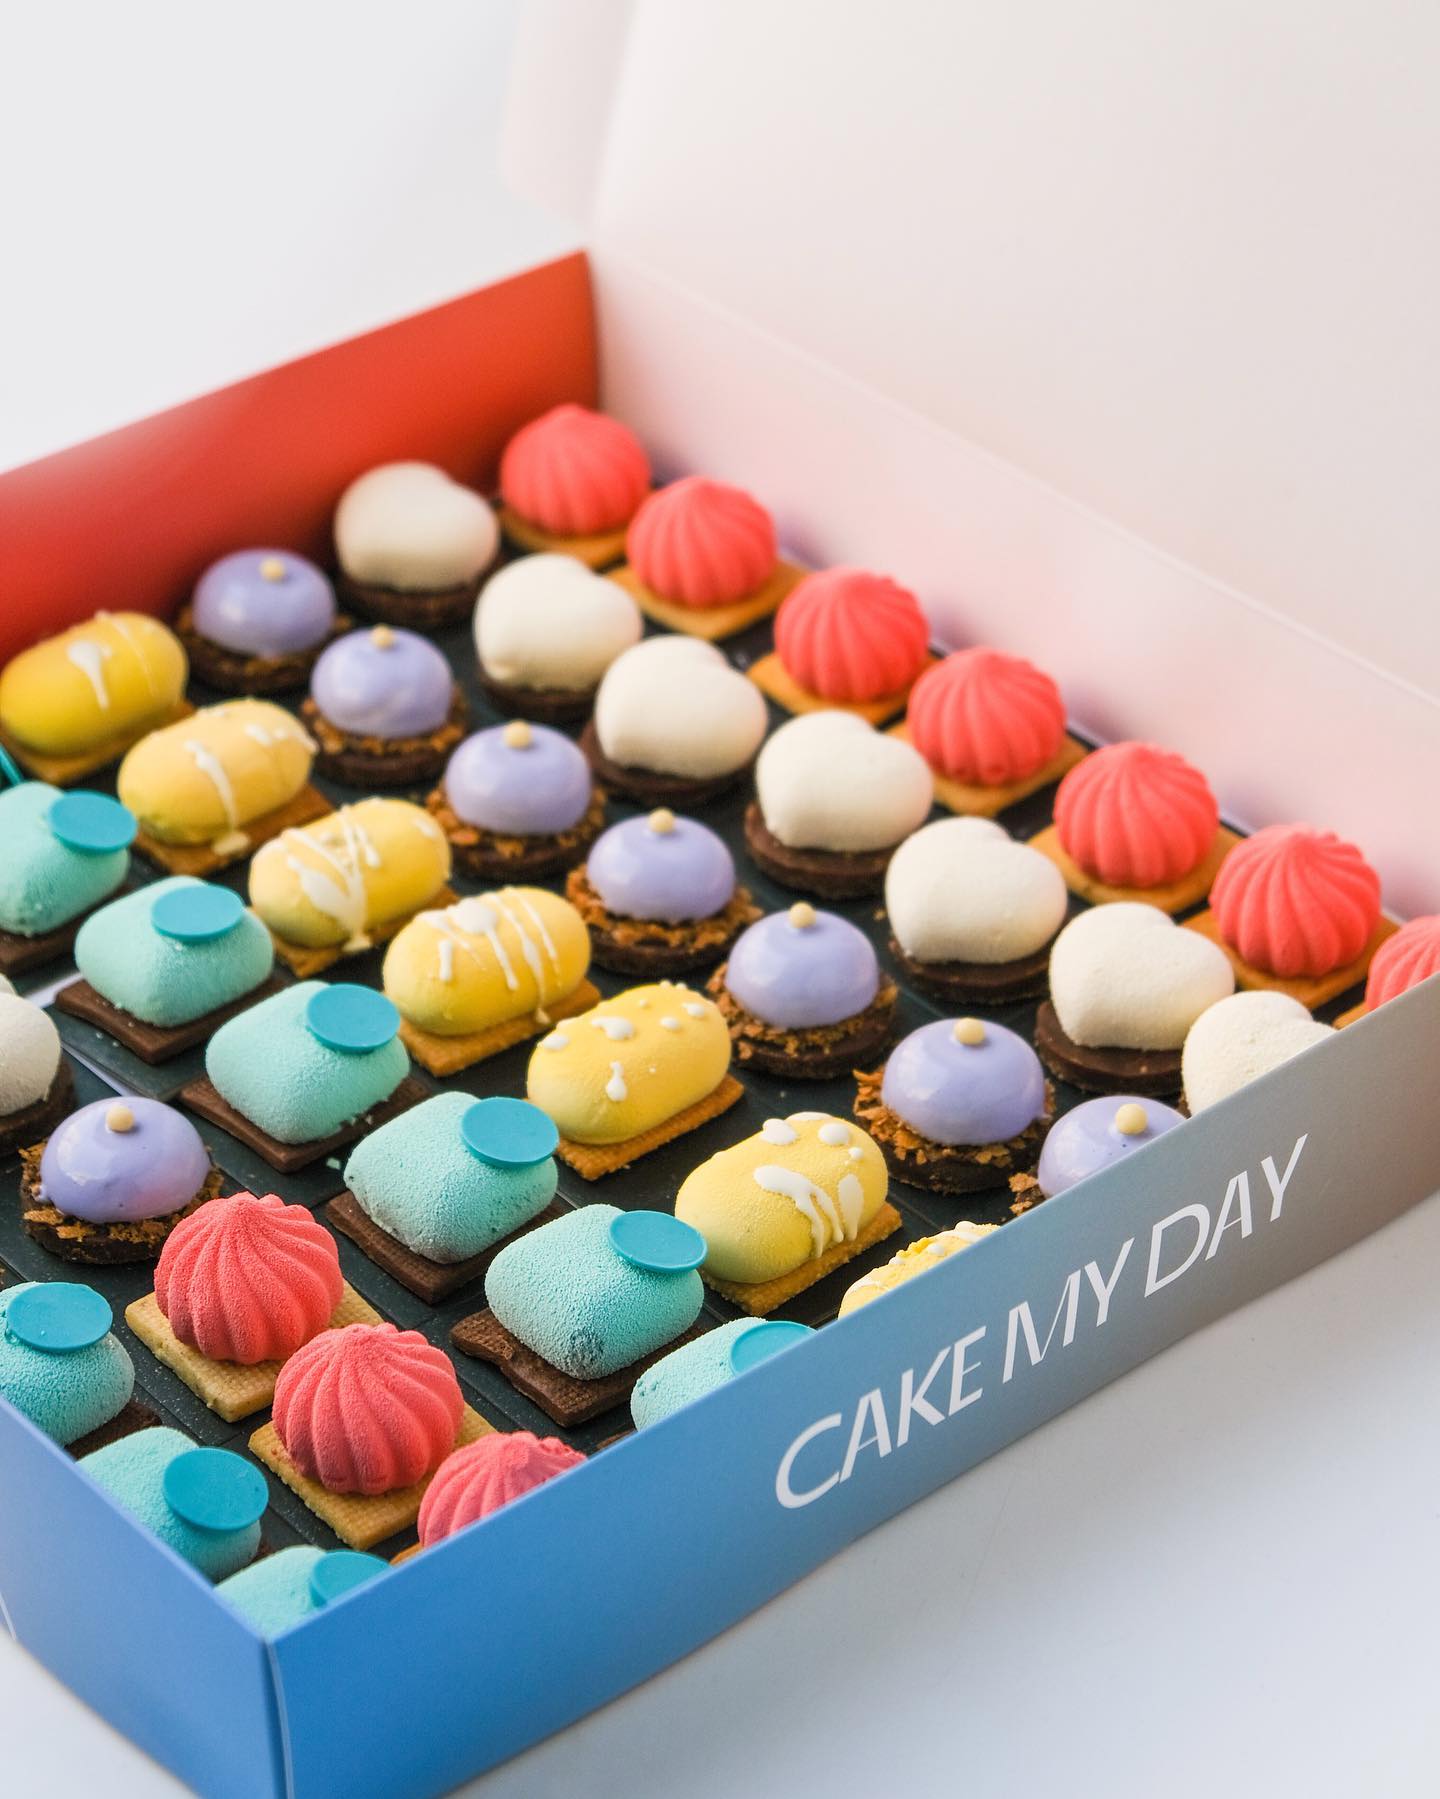 Colorful pralines made by small local business in Serbia